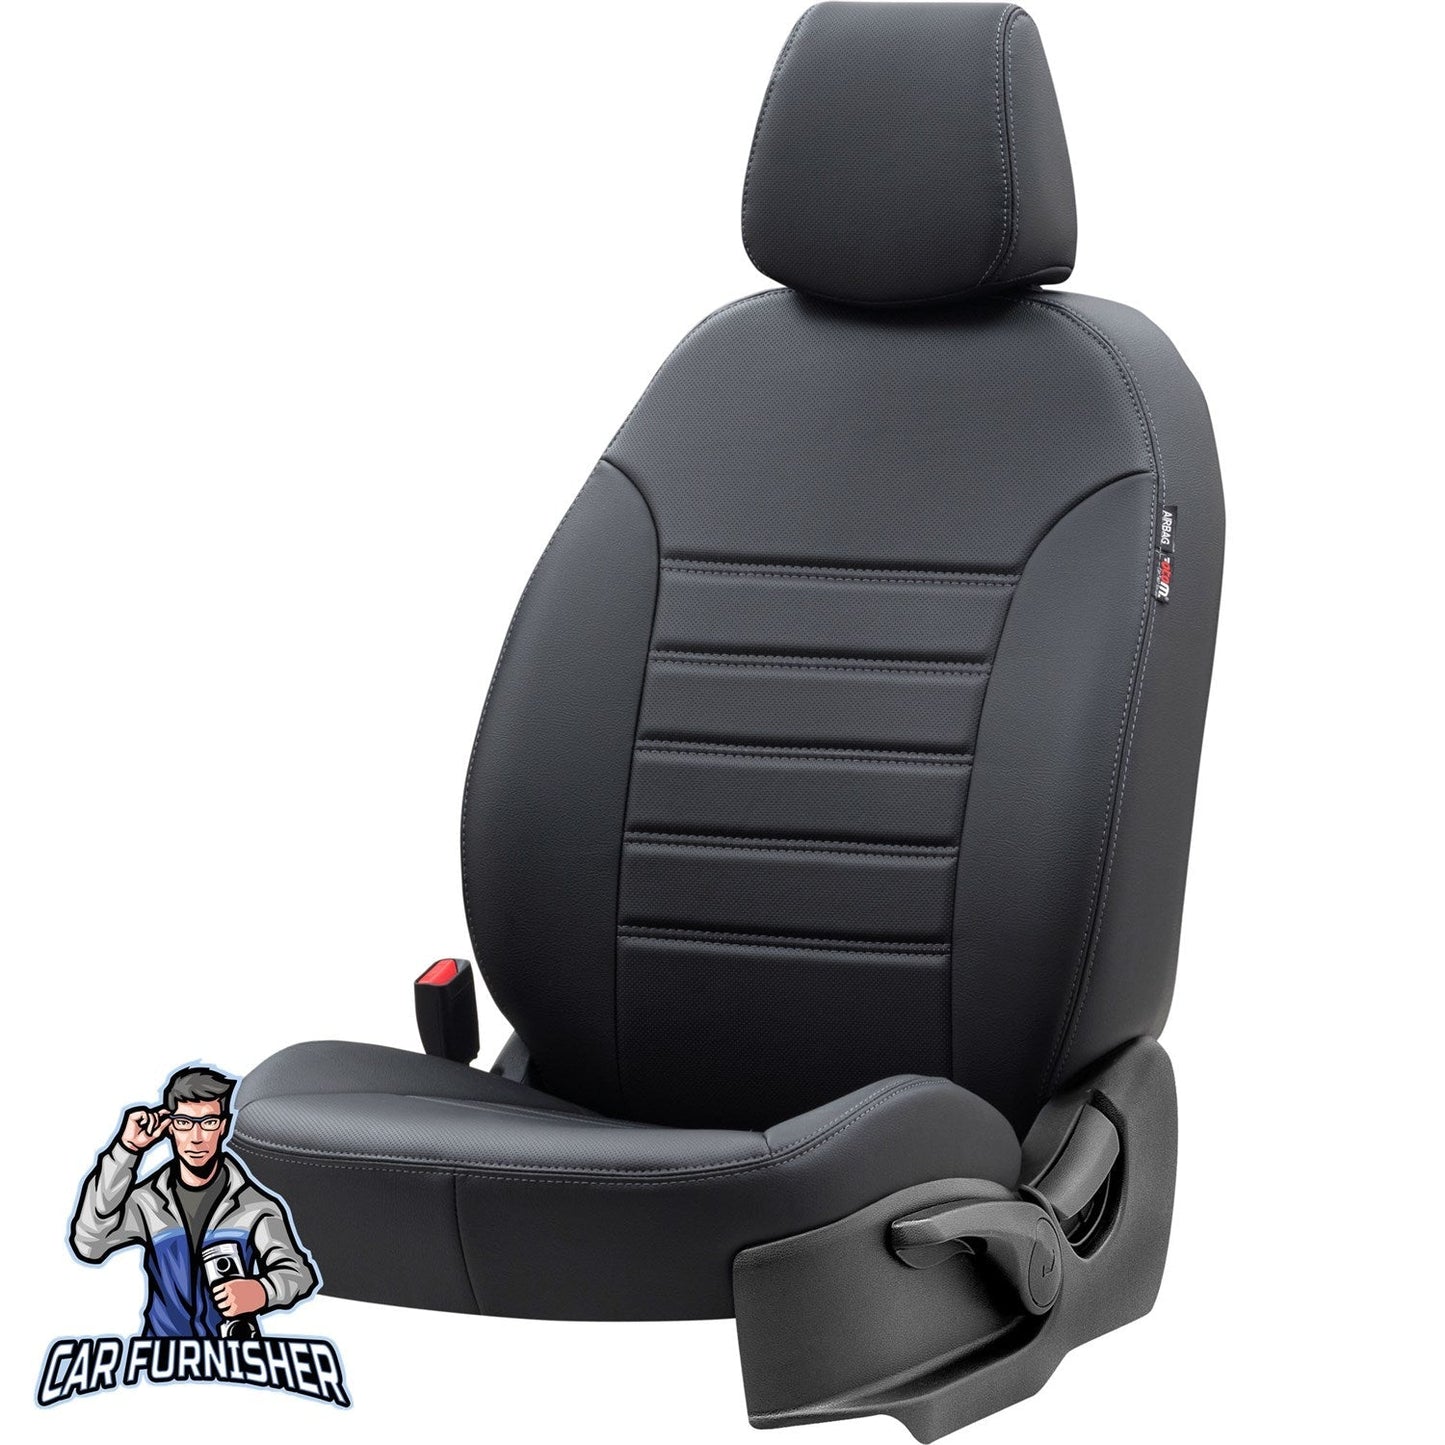 Isuzu N-Wide Seat Covers Istanbul Leather Design Black Leather